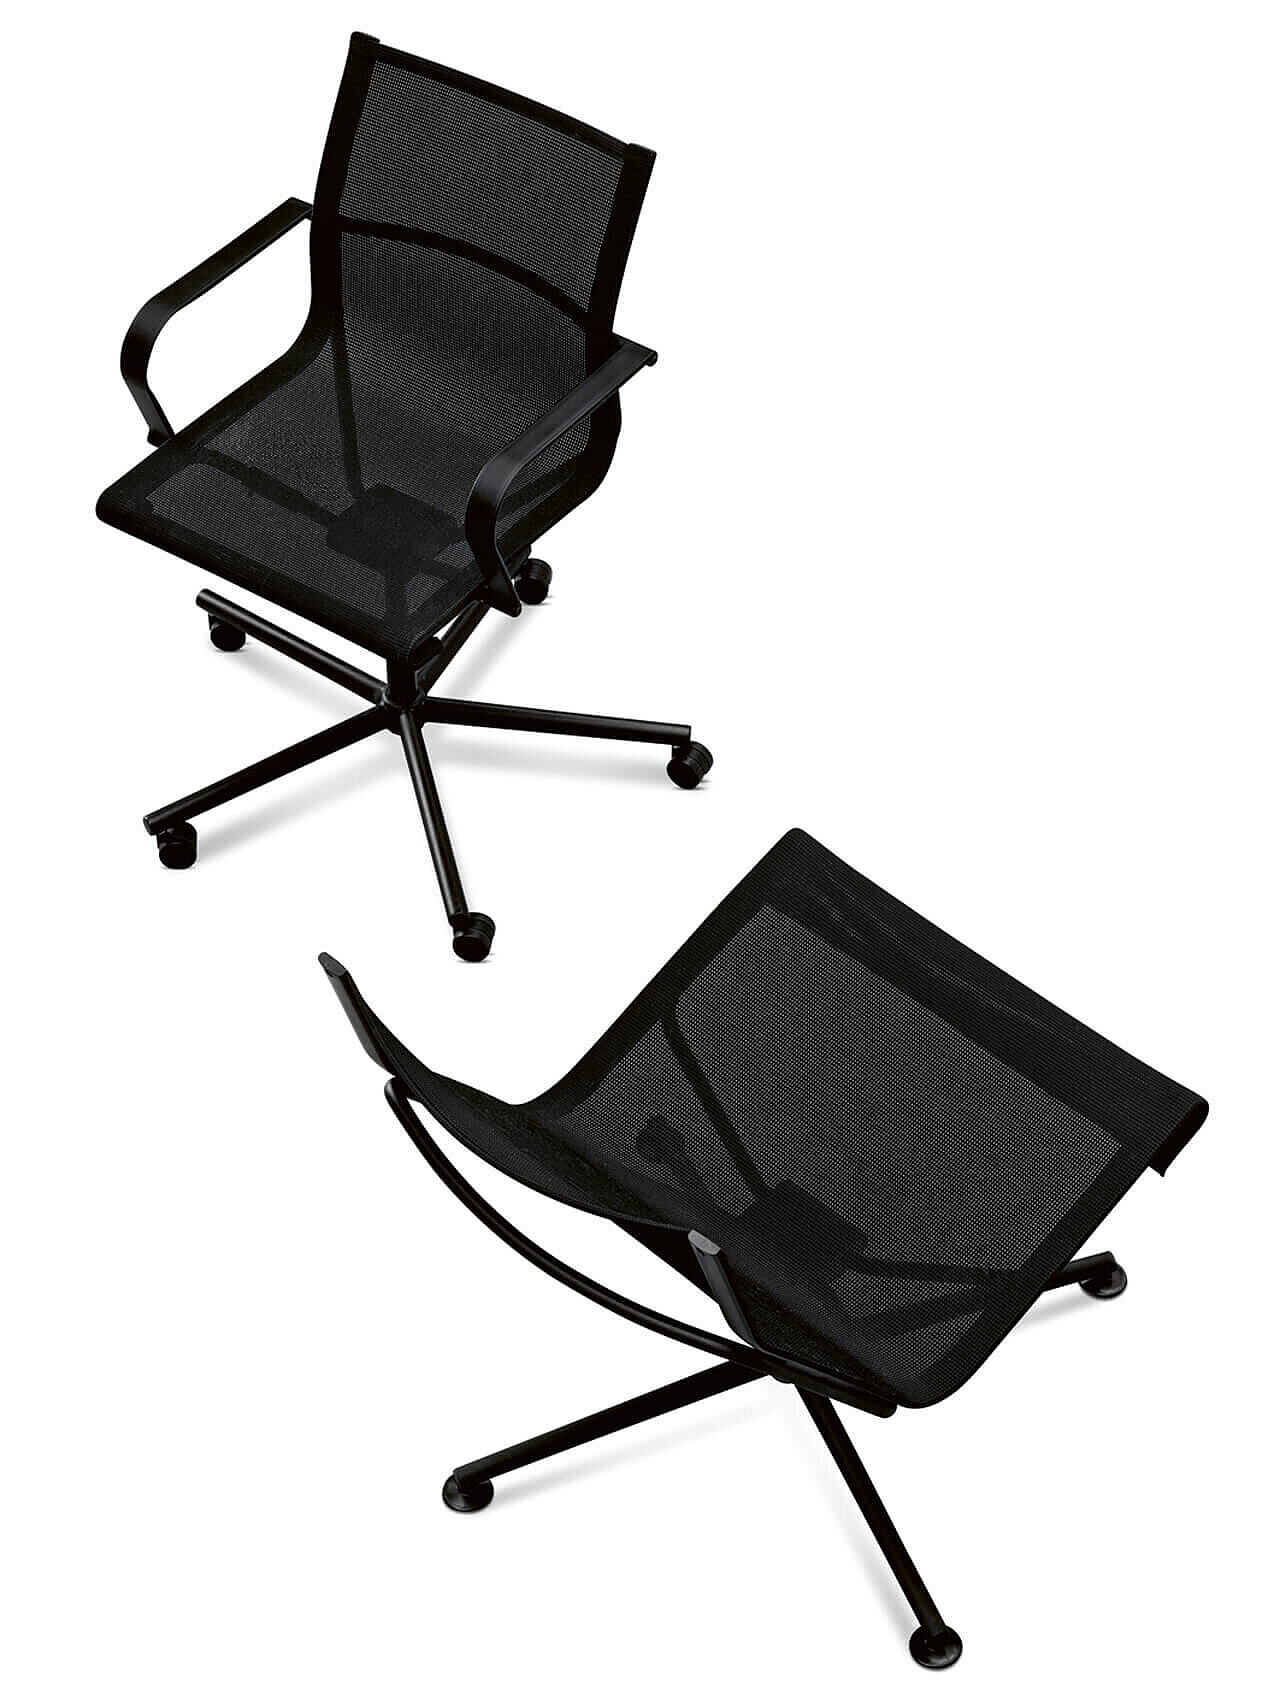 The chair “D1 – Office and Low Chair”